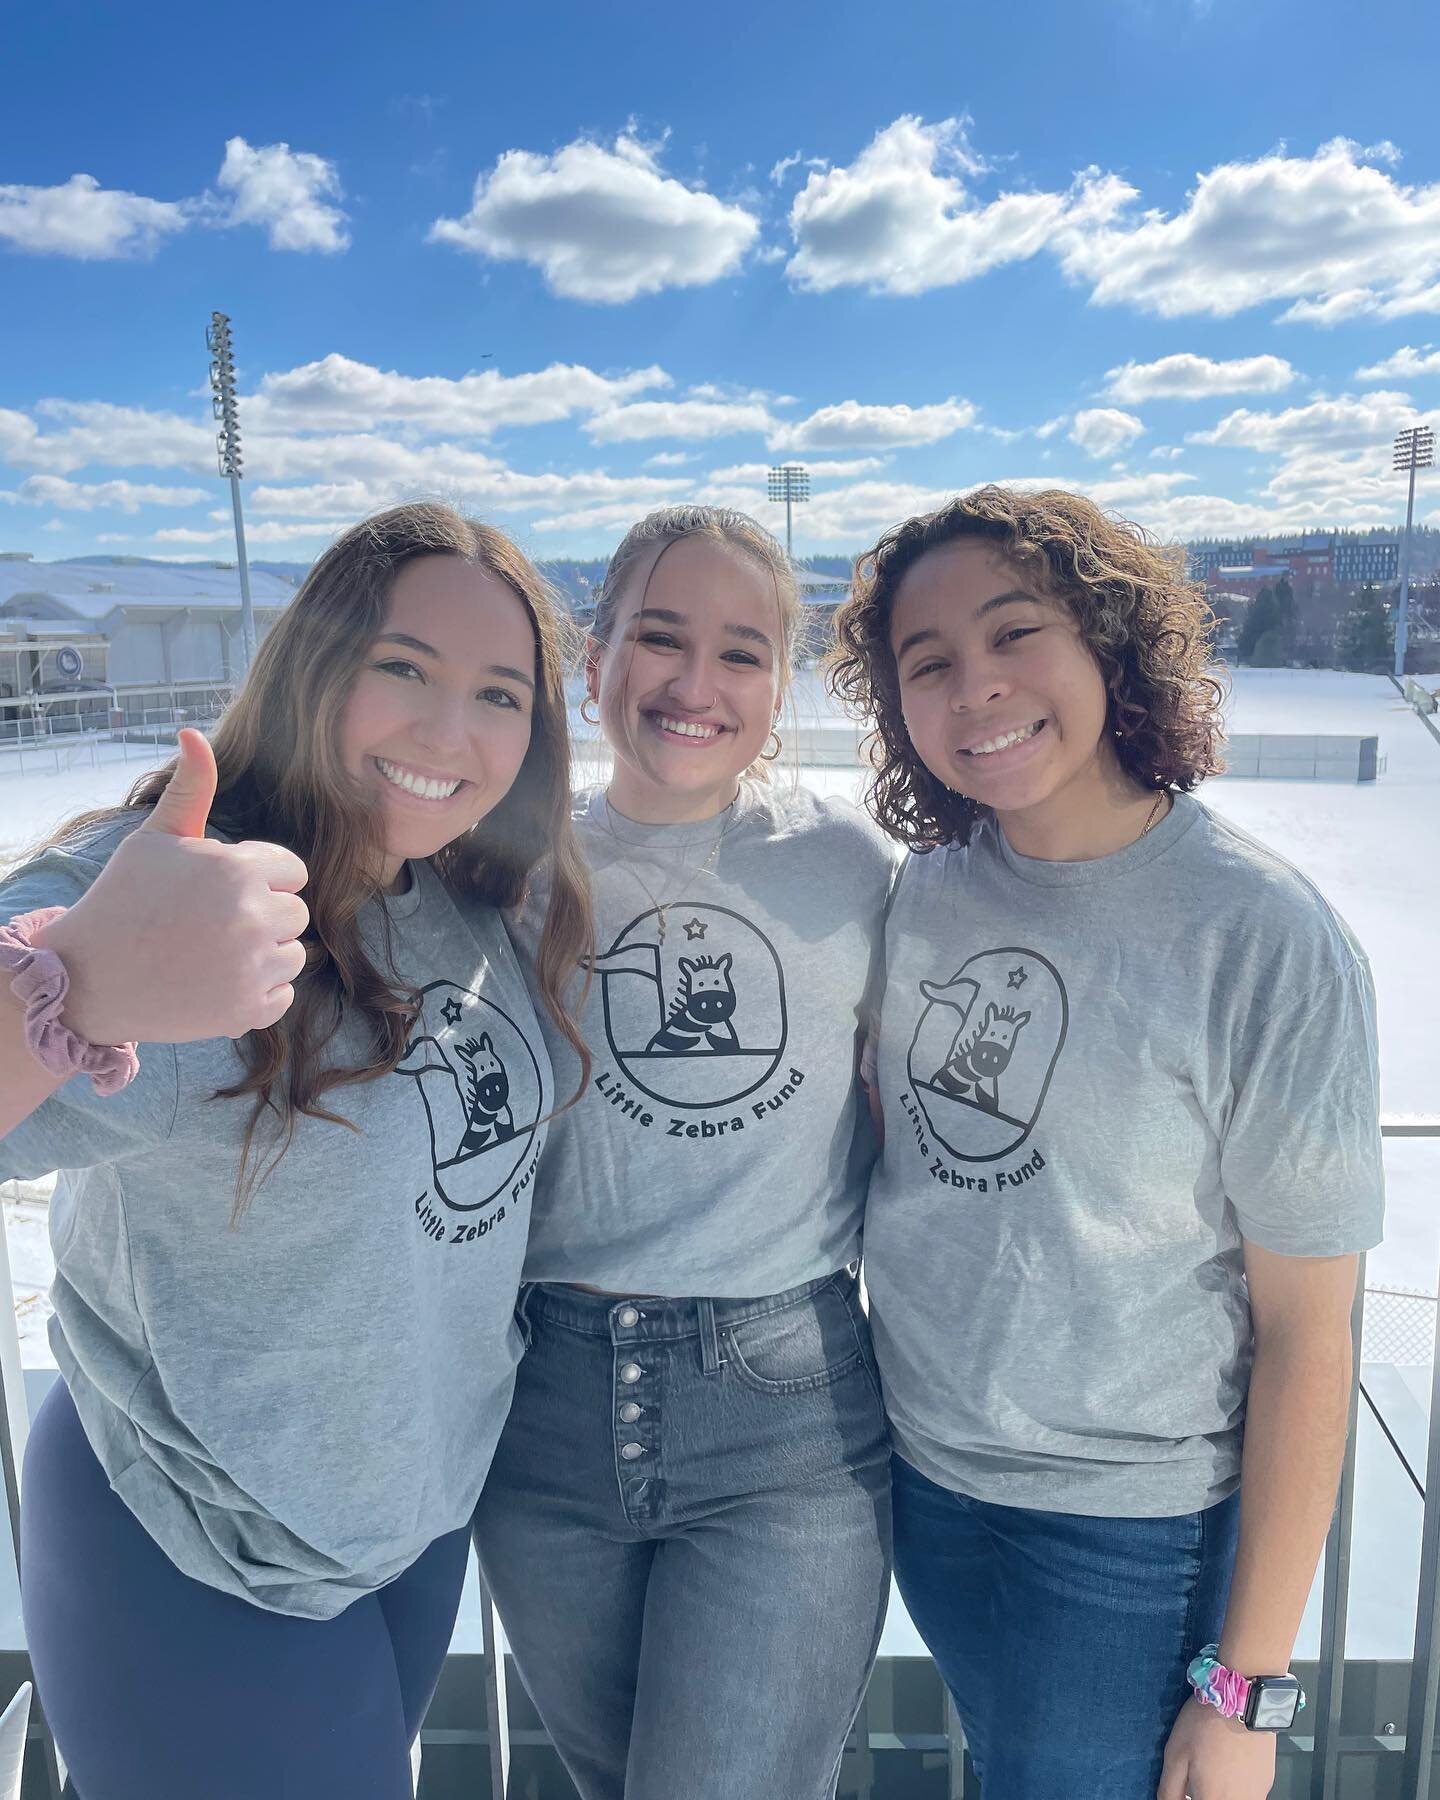 LZF In The Wild // Spotted: A few of our LZF t-shirts sported by three fabulous aspiring GC students! They created some of the tiles we have been using for our current fundraiser! We are so grateful! 

Please consider donating today to help us reach 